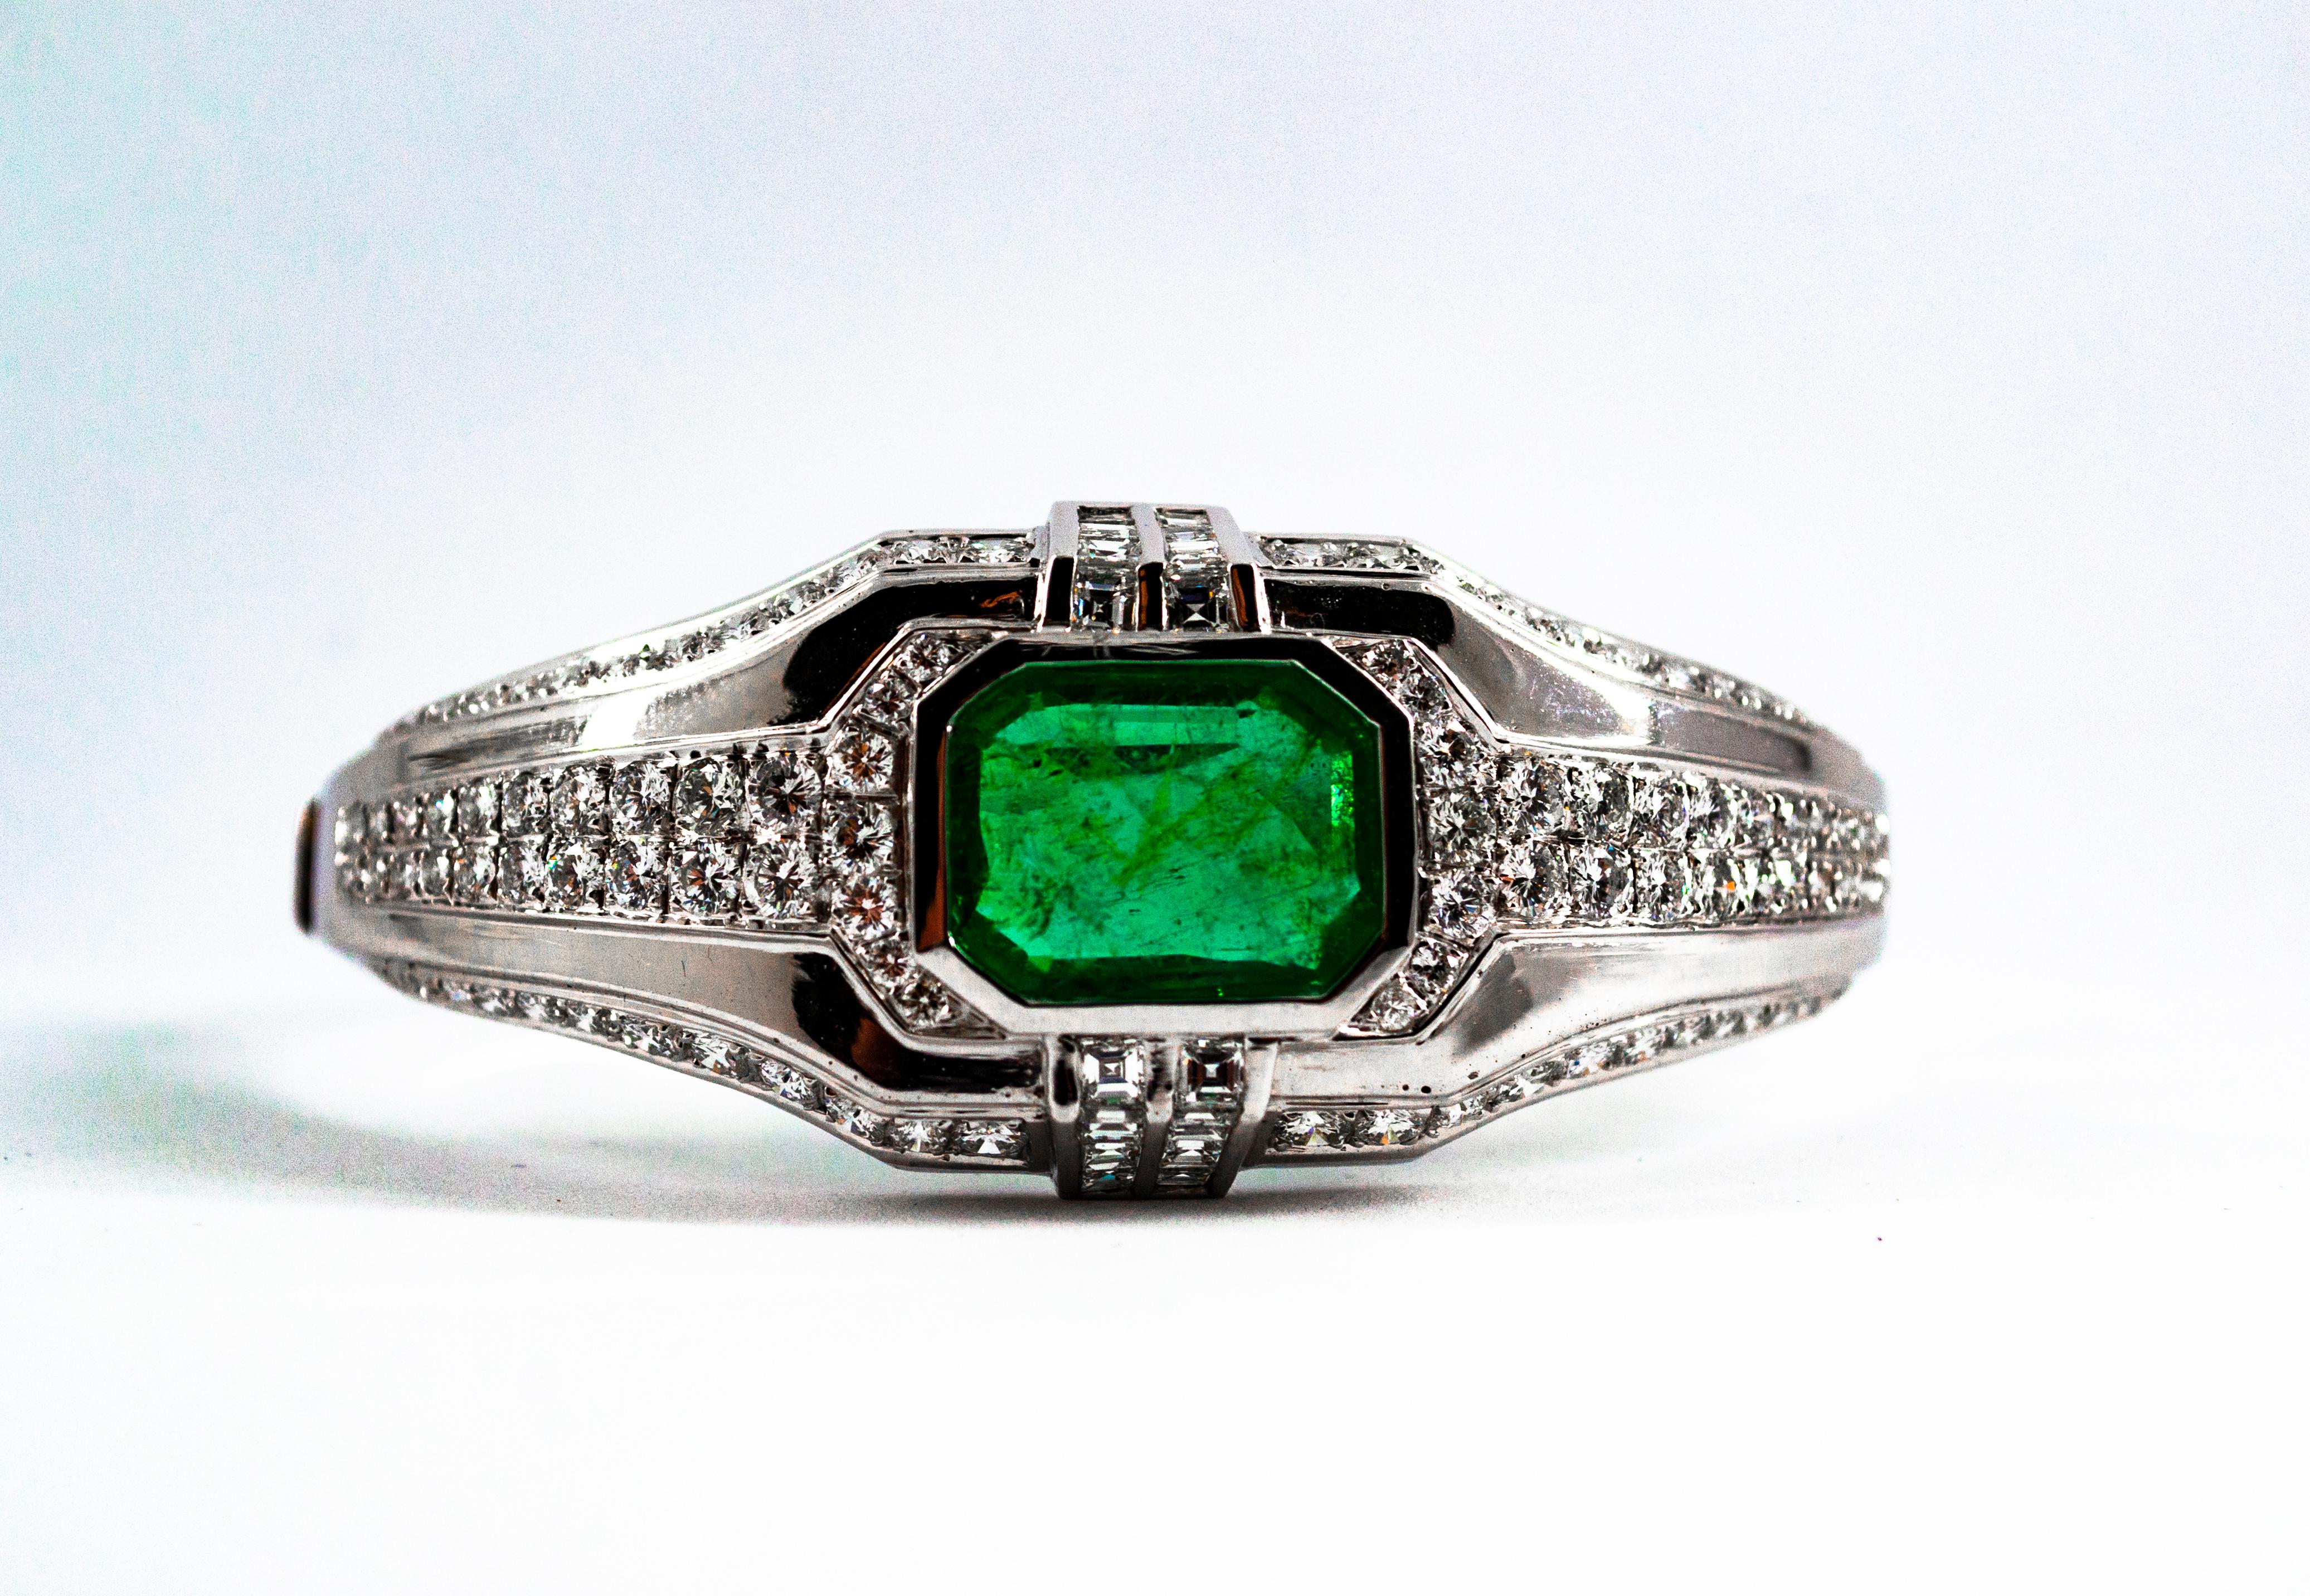 This Bracelet is made of 18K White Gold.
This Bracelet has 7.40 Carats of White Brilliant Cut and Princess Cut Diamonds.
This Bracelet has a 7.10 Carats Colombia Natural Emerald Cut Emerald.
This Bracelet is inspired by Art Deco.

We're a workshop